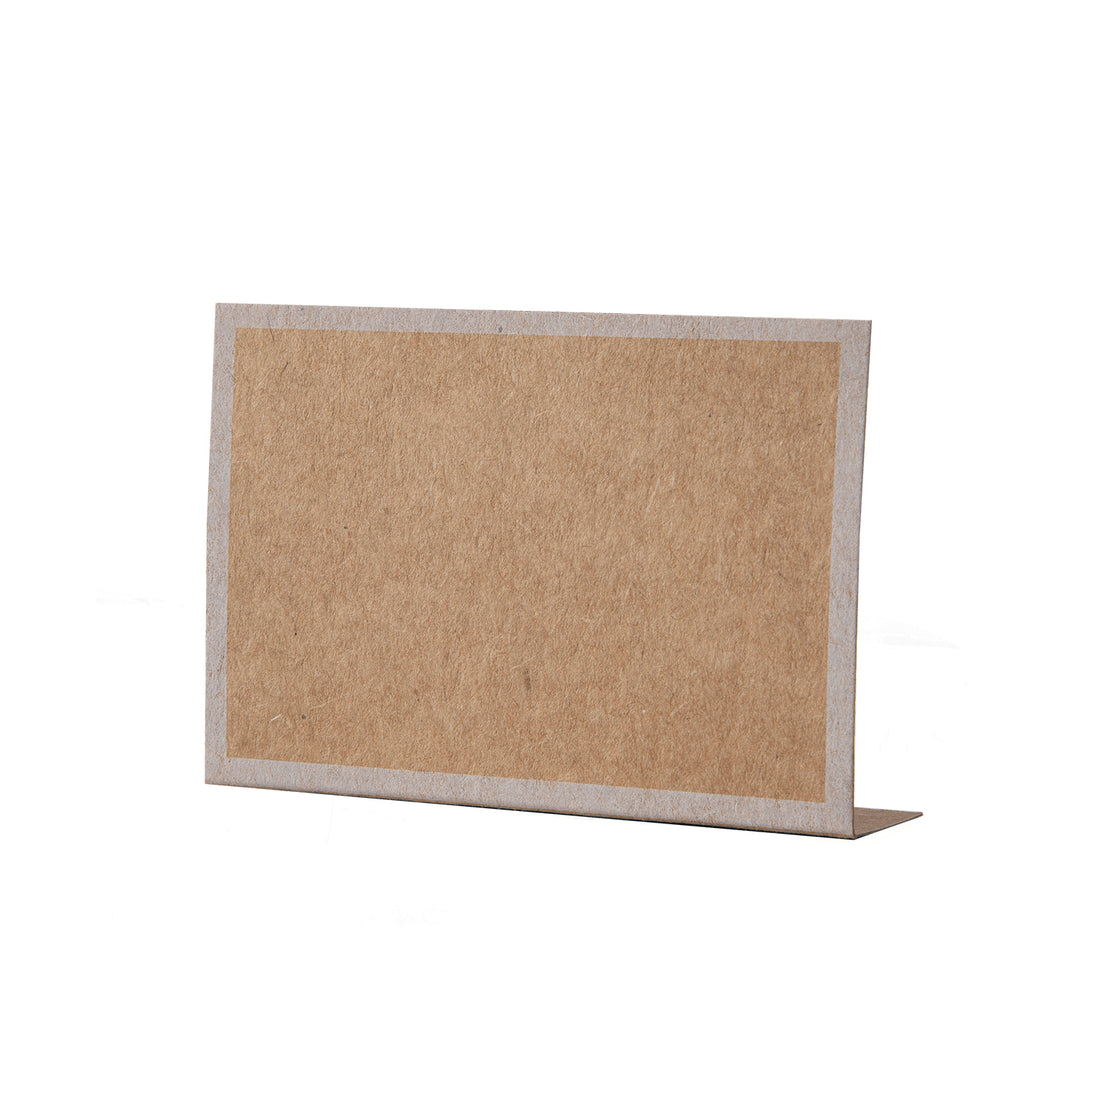 A free-standing, rectangular kraft table card with a simple white frame around the edges.